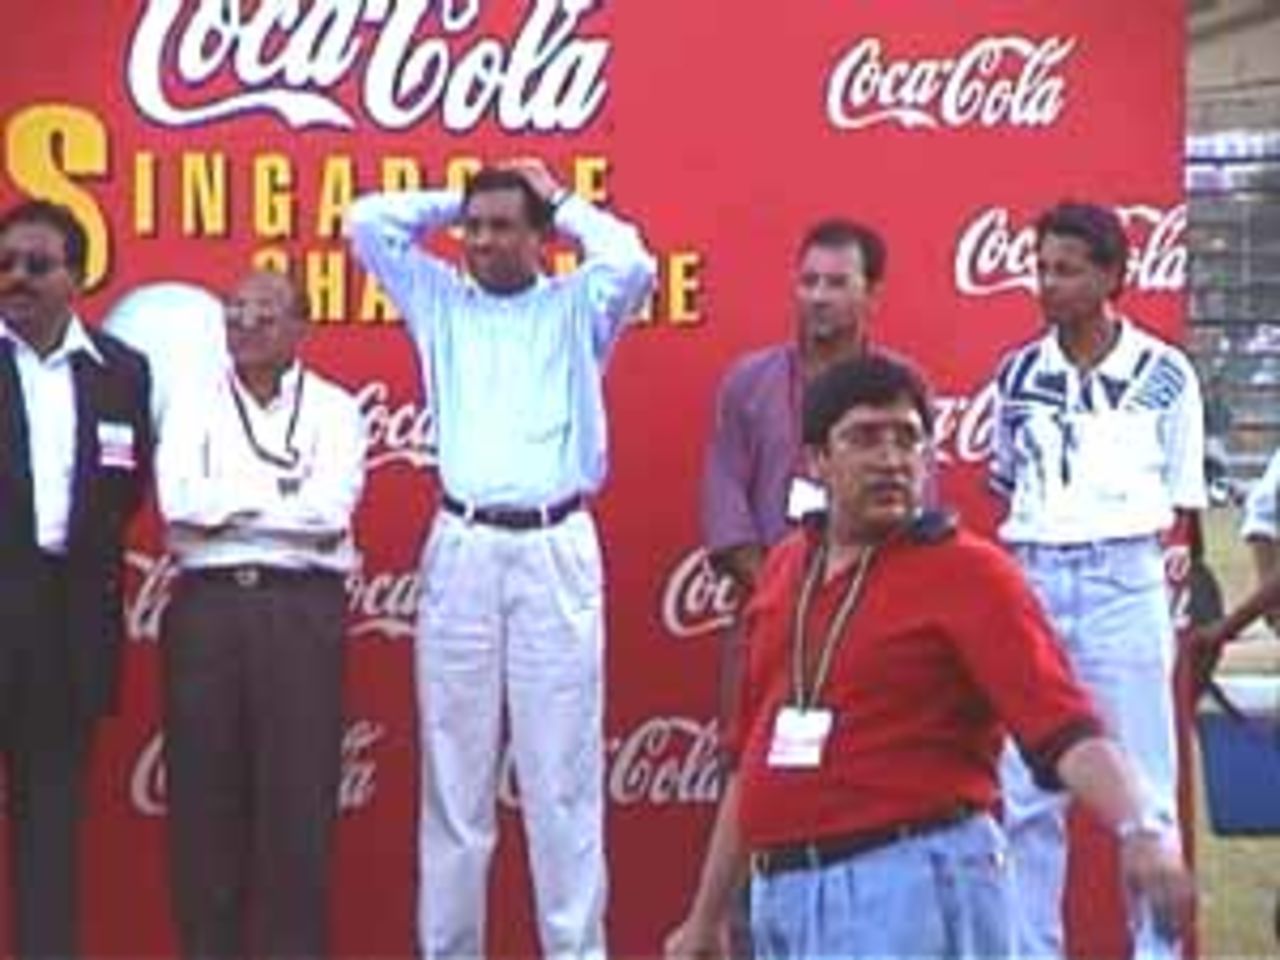 The presentation party, India v West Indies (3rd ODI), Coca-Cola Singapore Challenge, 1999-2000, Kallang Ground, Singapore, 5 Sep 1999.